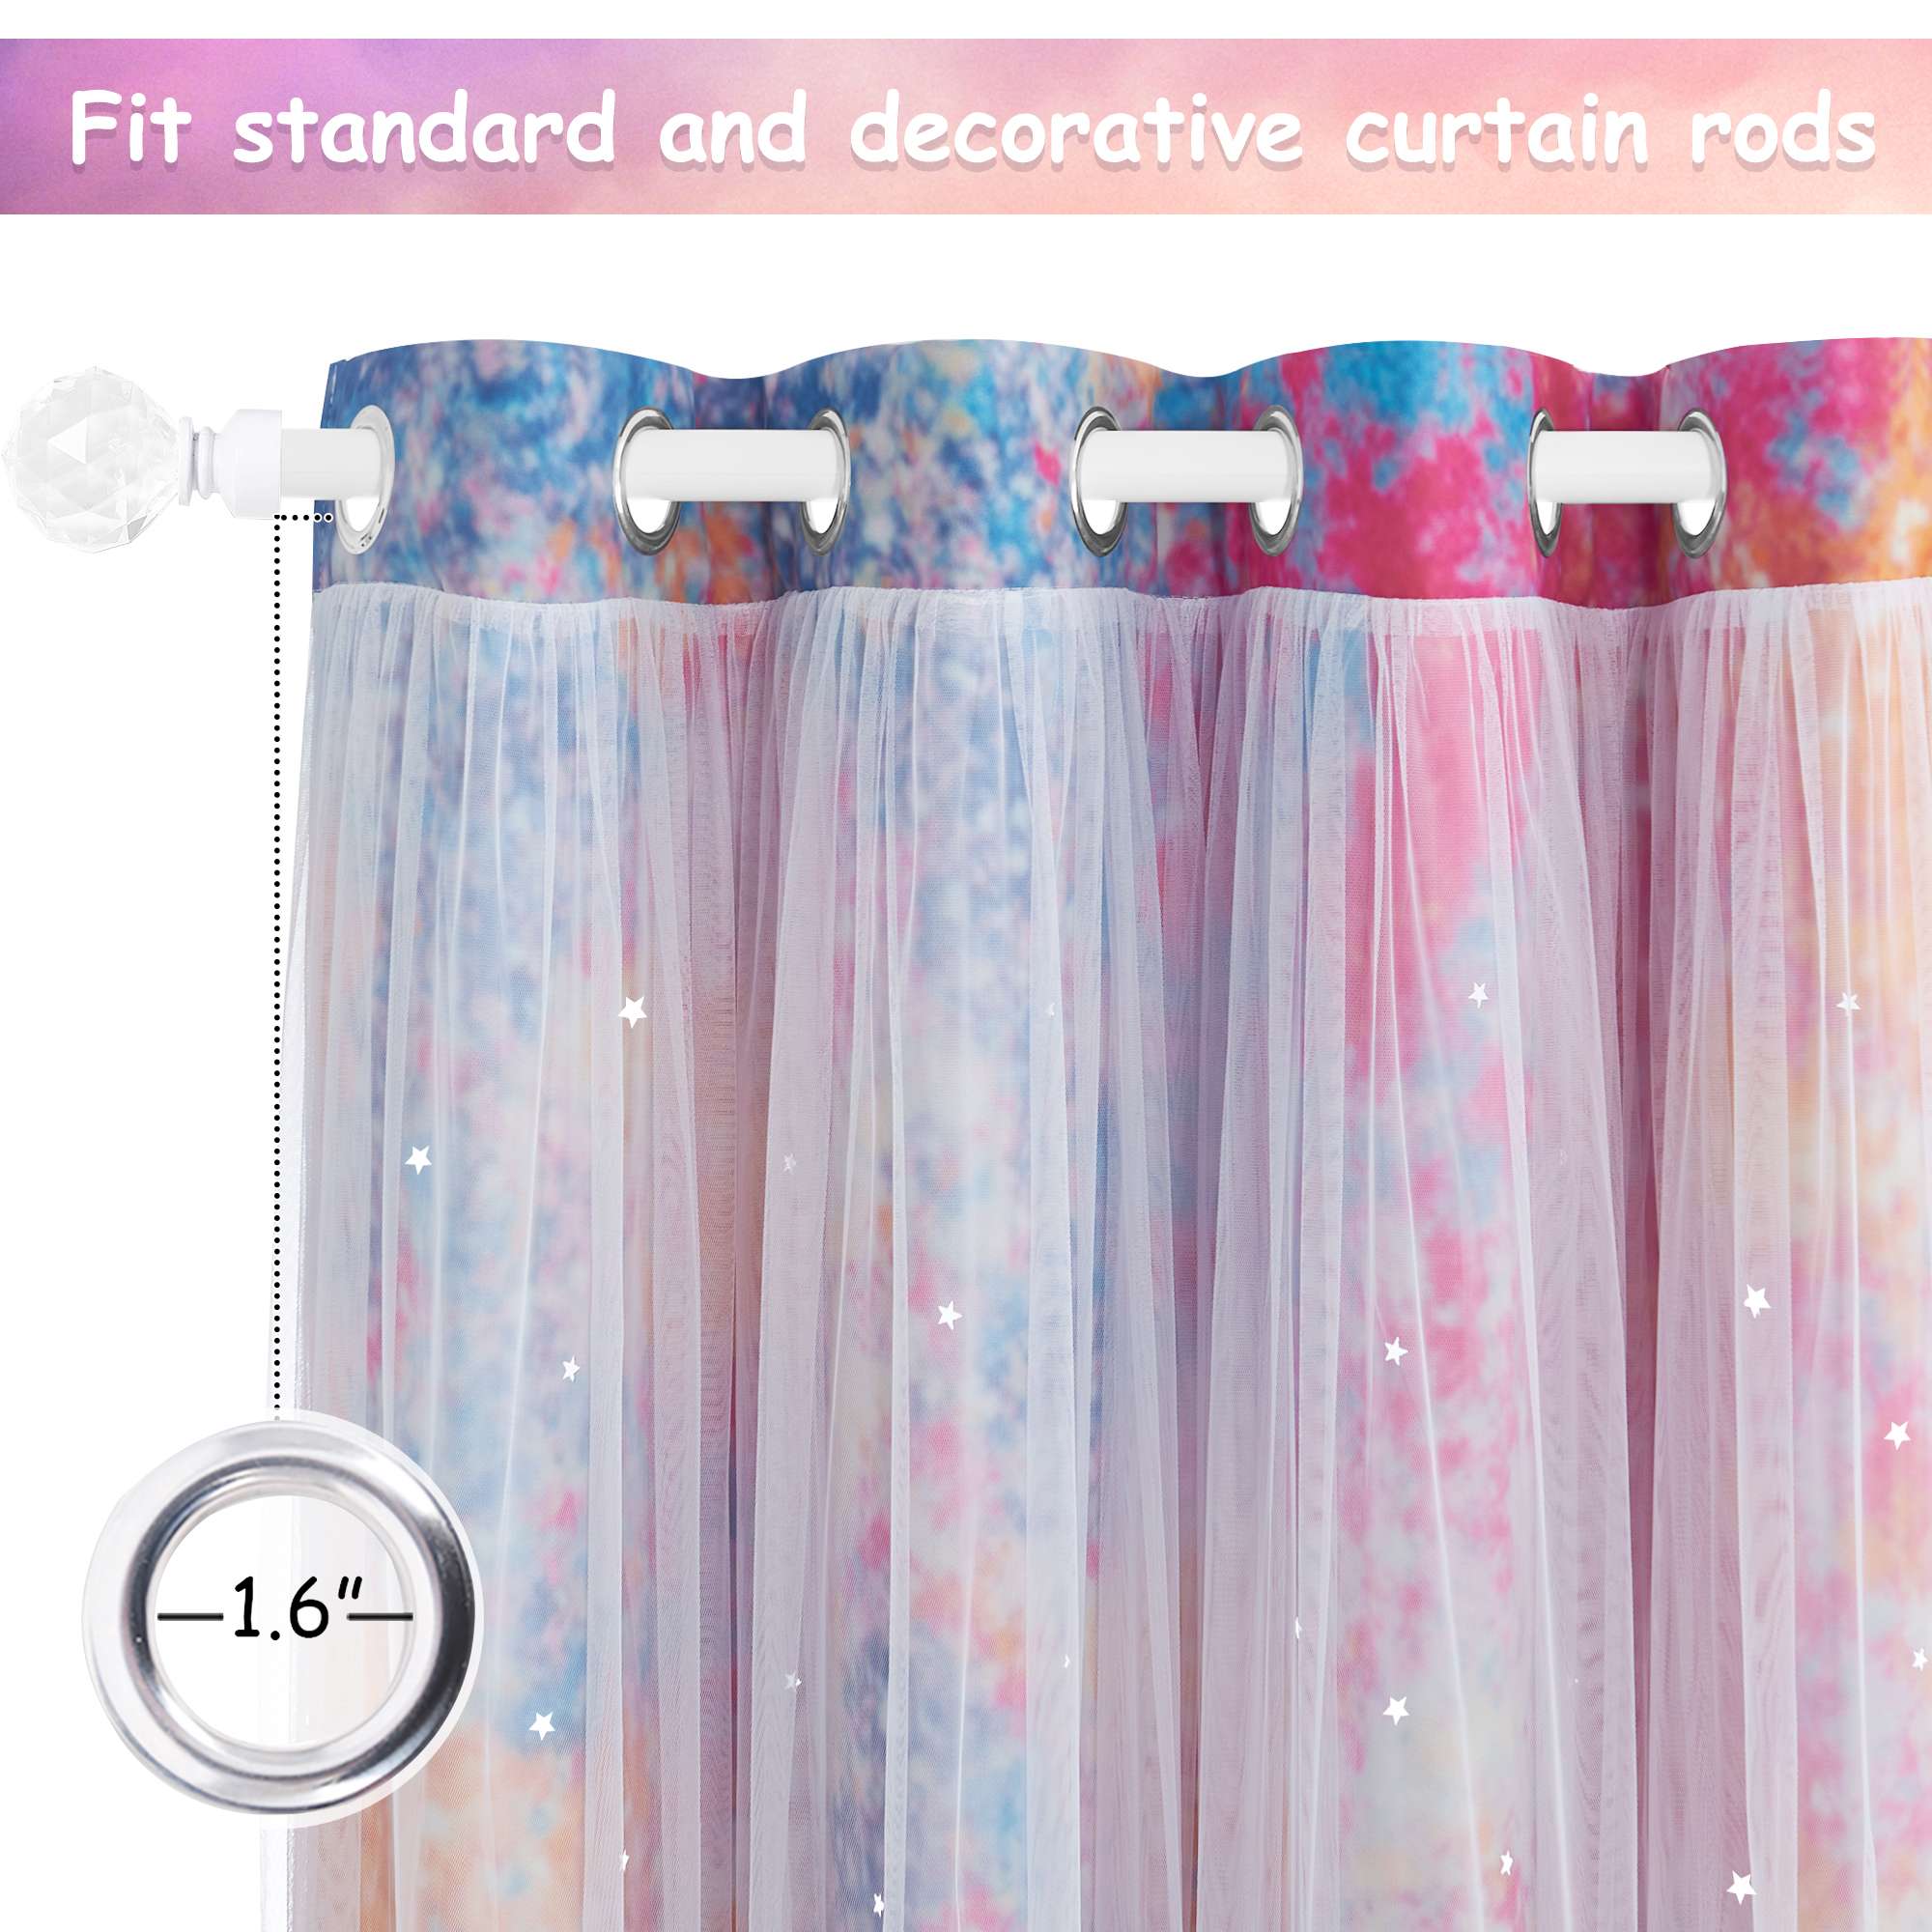 Yellow & Pink Curtains Double Layer with Sheer Star Cut Out Blackout Curtains for Kids Nursery 2 Panels